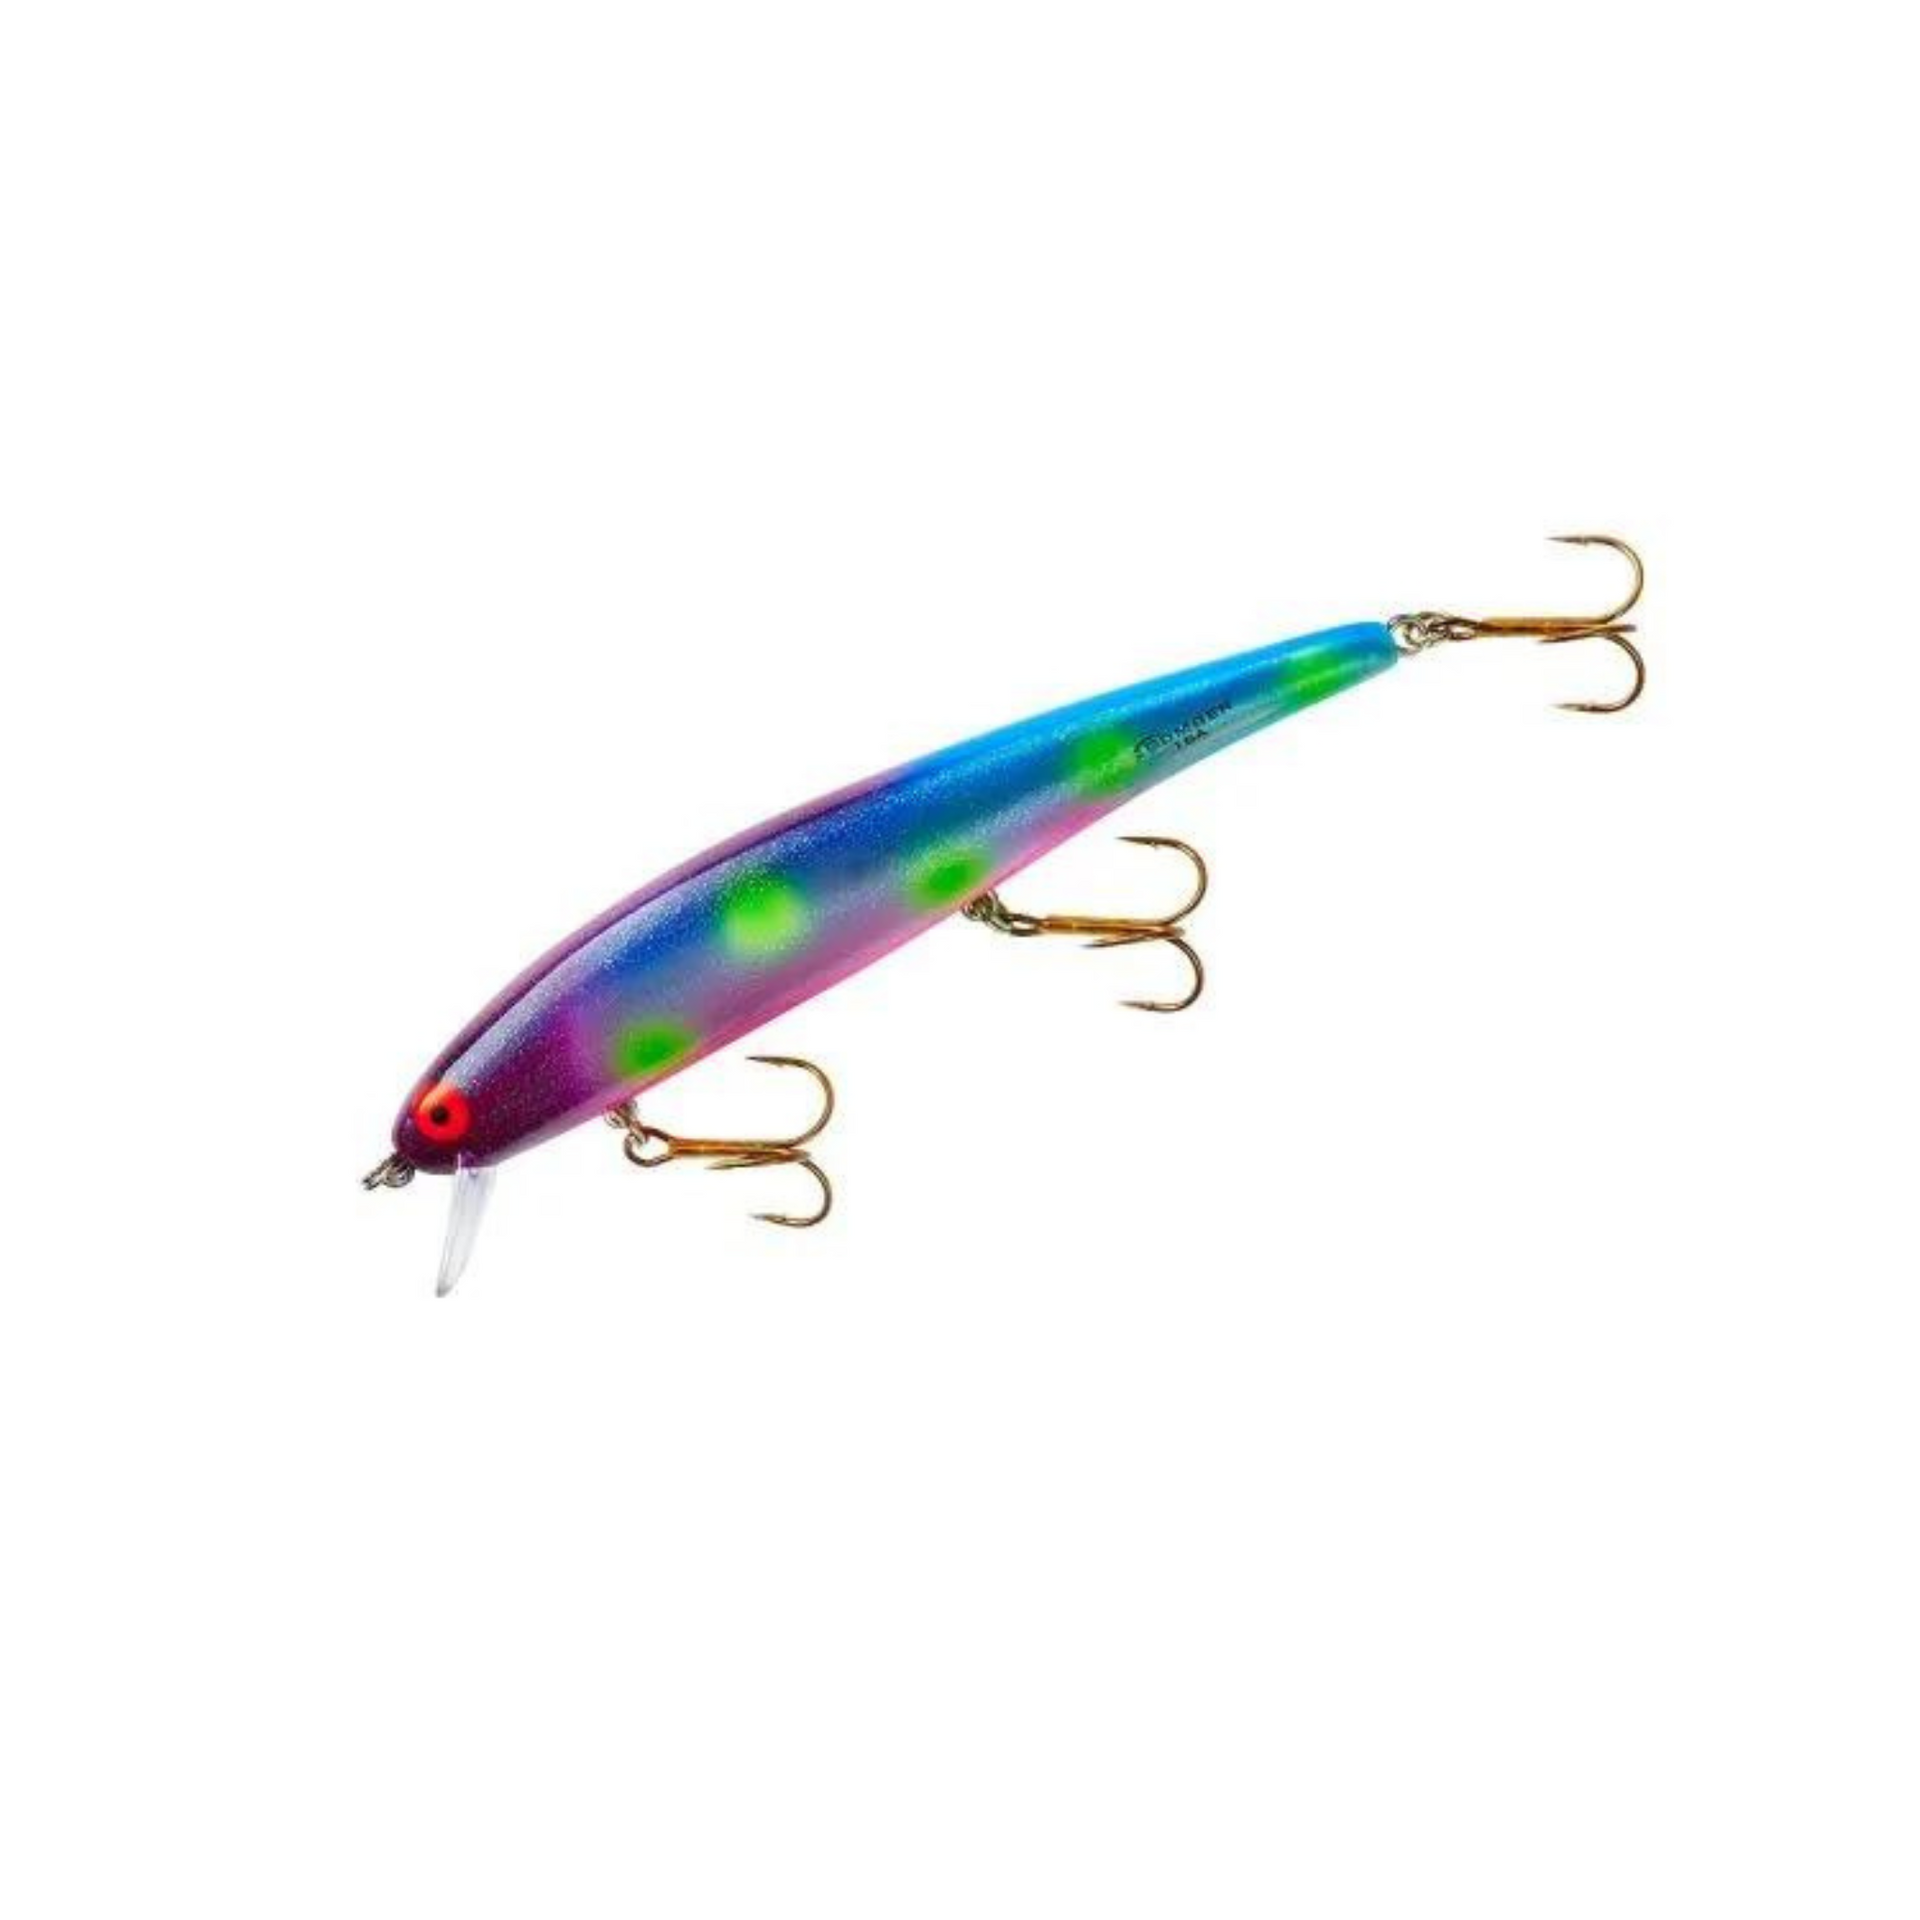 BOMBER Lures Long A Slender Minnow Jerbait Fishing Lure, Fruity